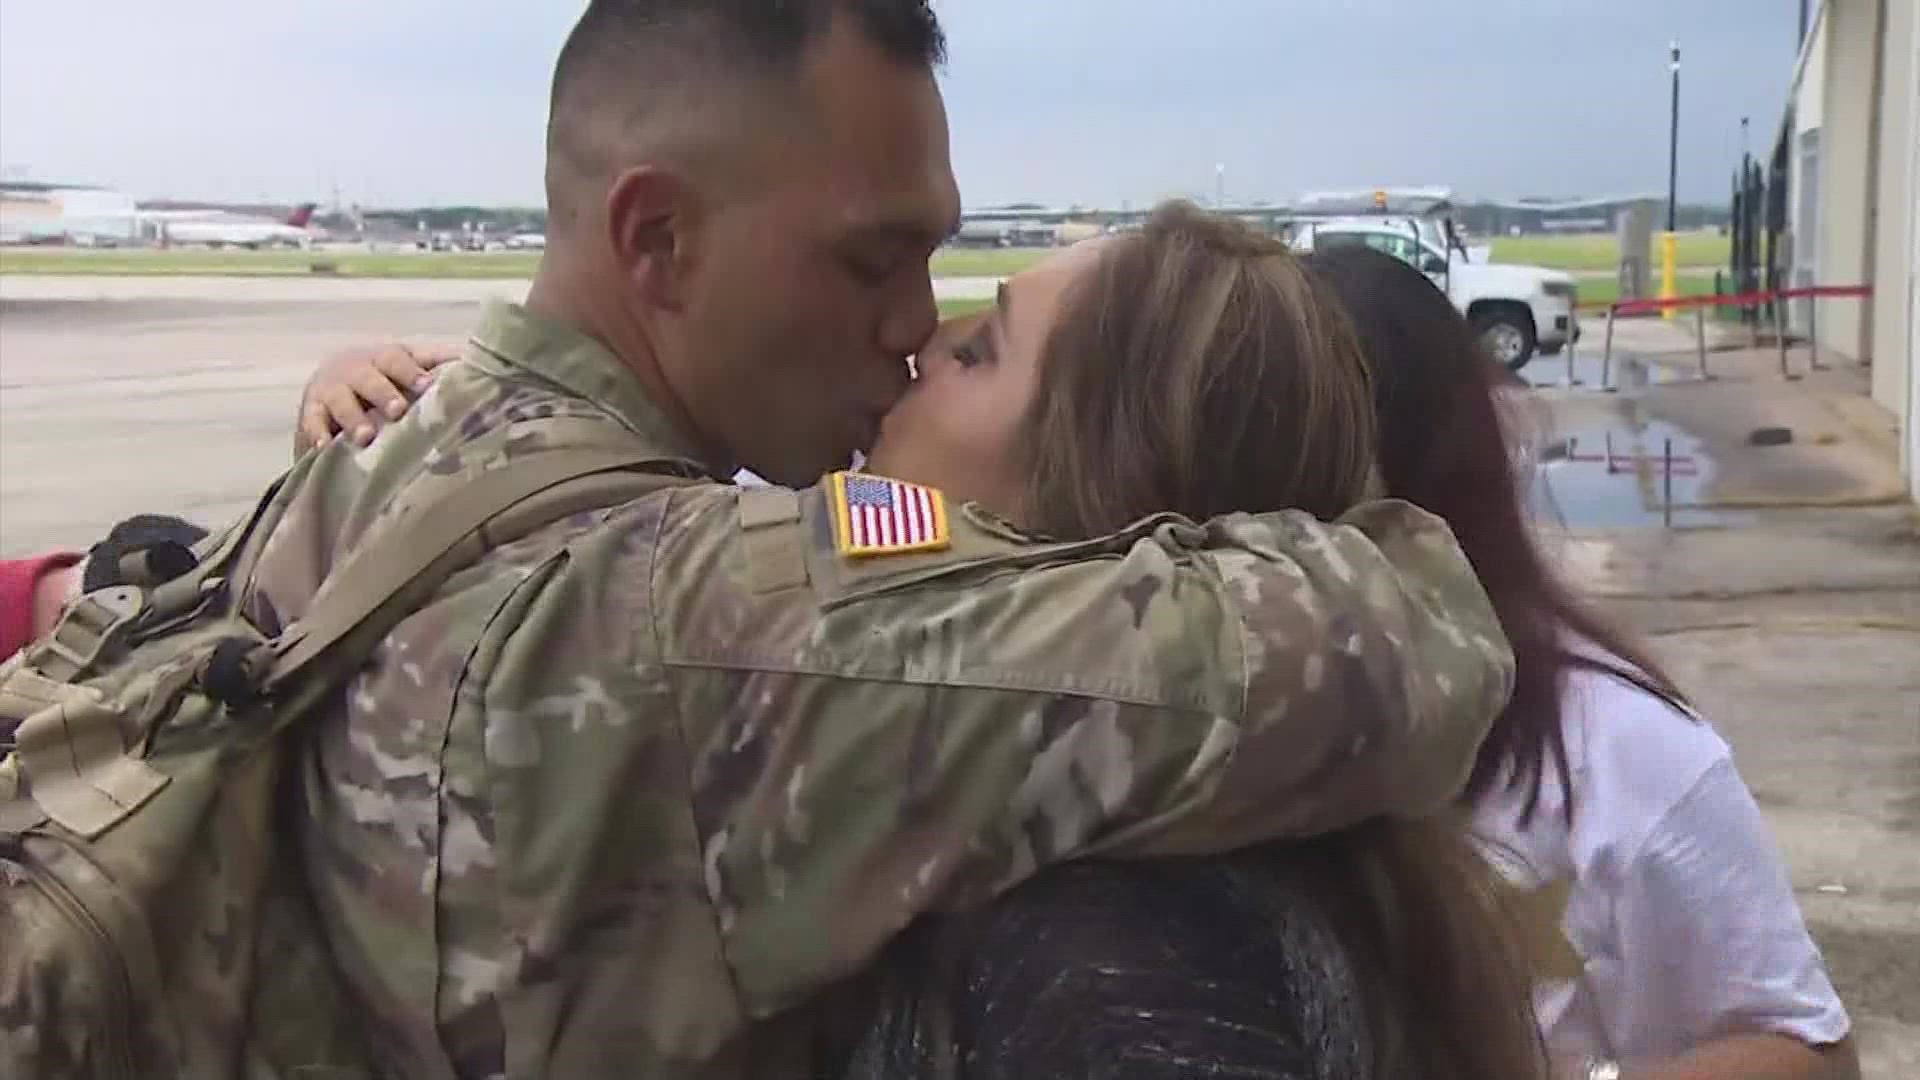 Family and friends were there to be reunited with the soldiers returning from a peacekeeping mission in Egypt. Texans Cheerleaders also welcomed them home.